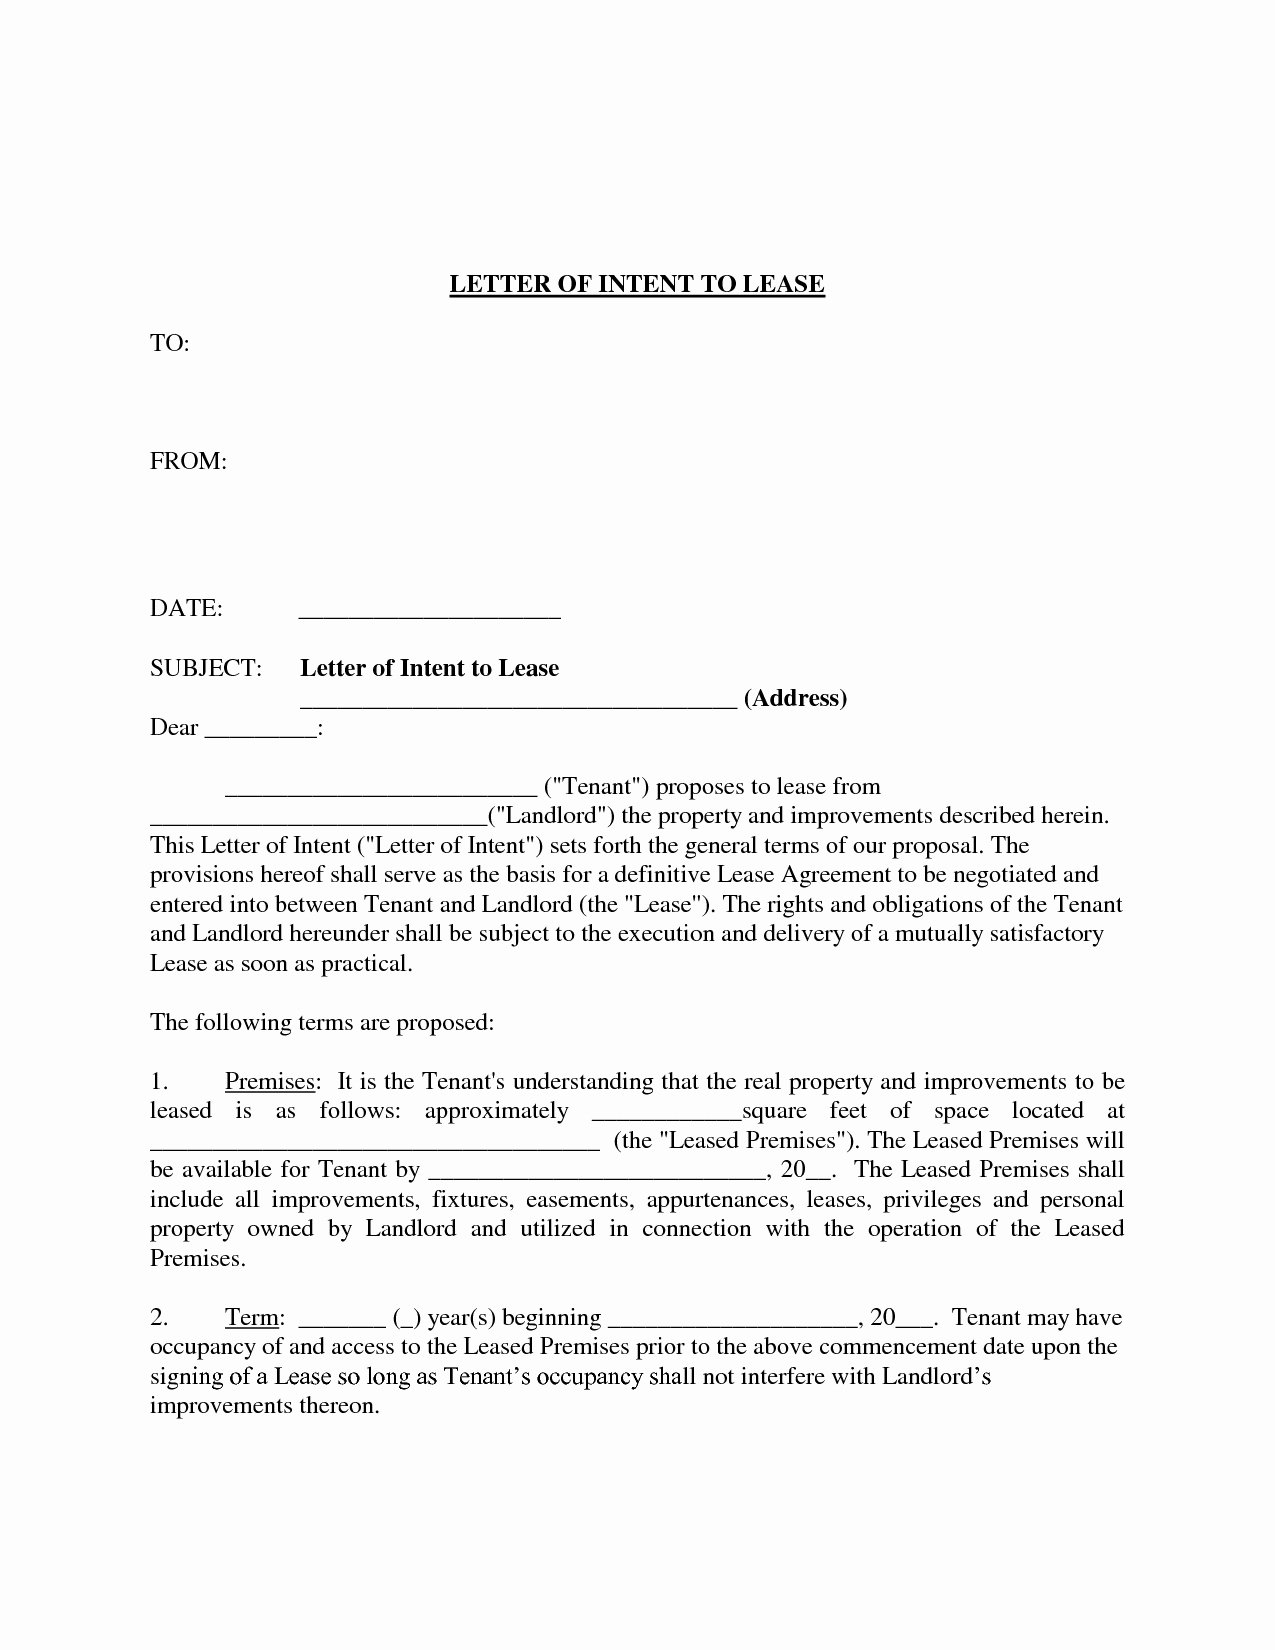 Sample Letter Of Intent to Lease Unique Letter Intent to Lease Mercial Property Template